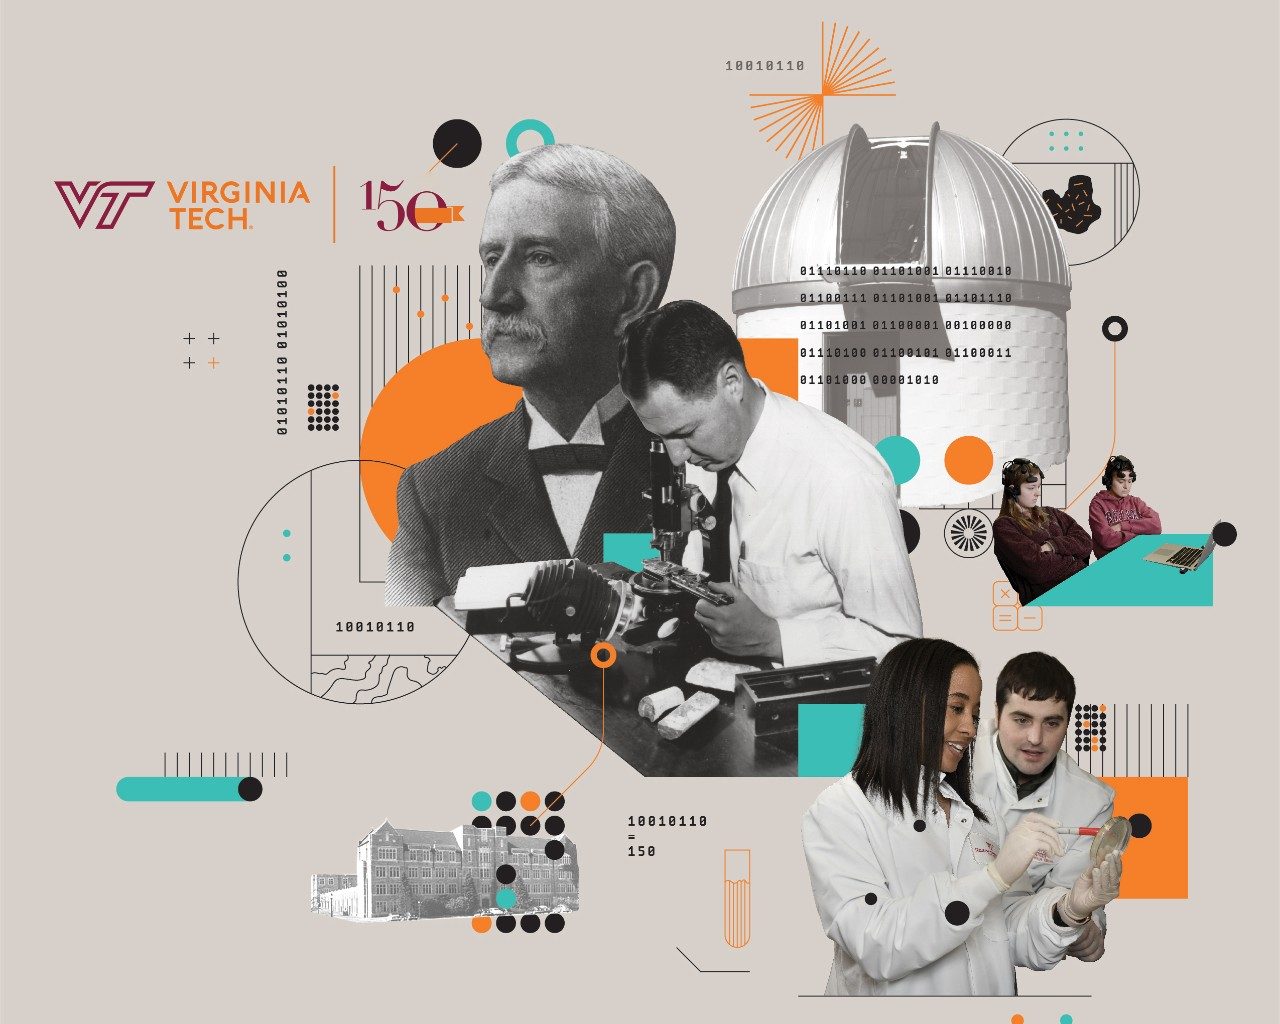 VT 150 logo with illustration and photos of notable science members over time ranging from black and white to color